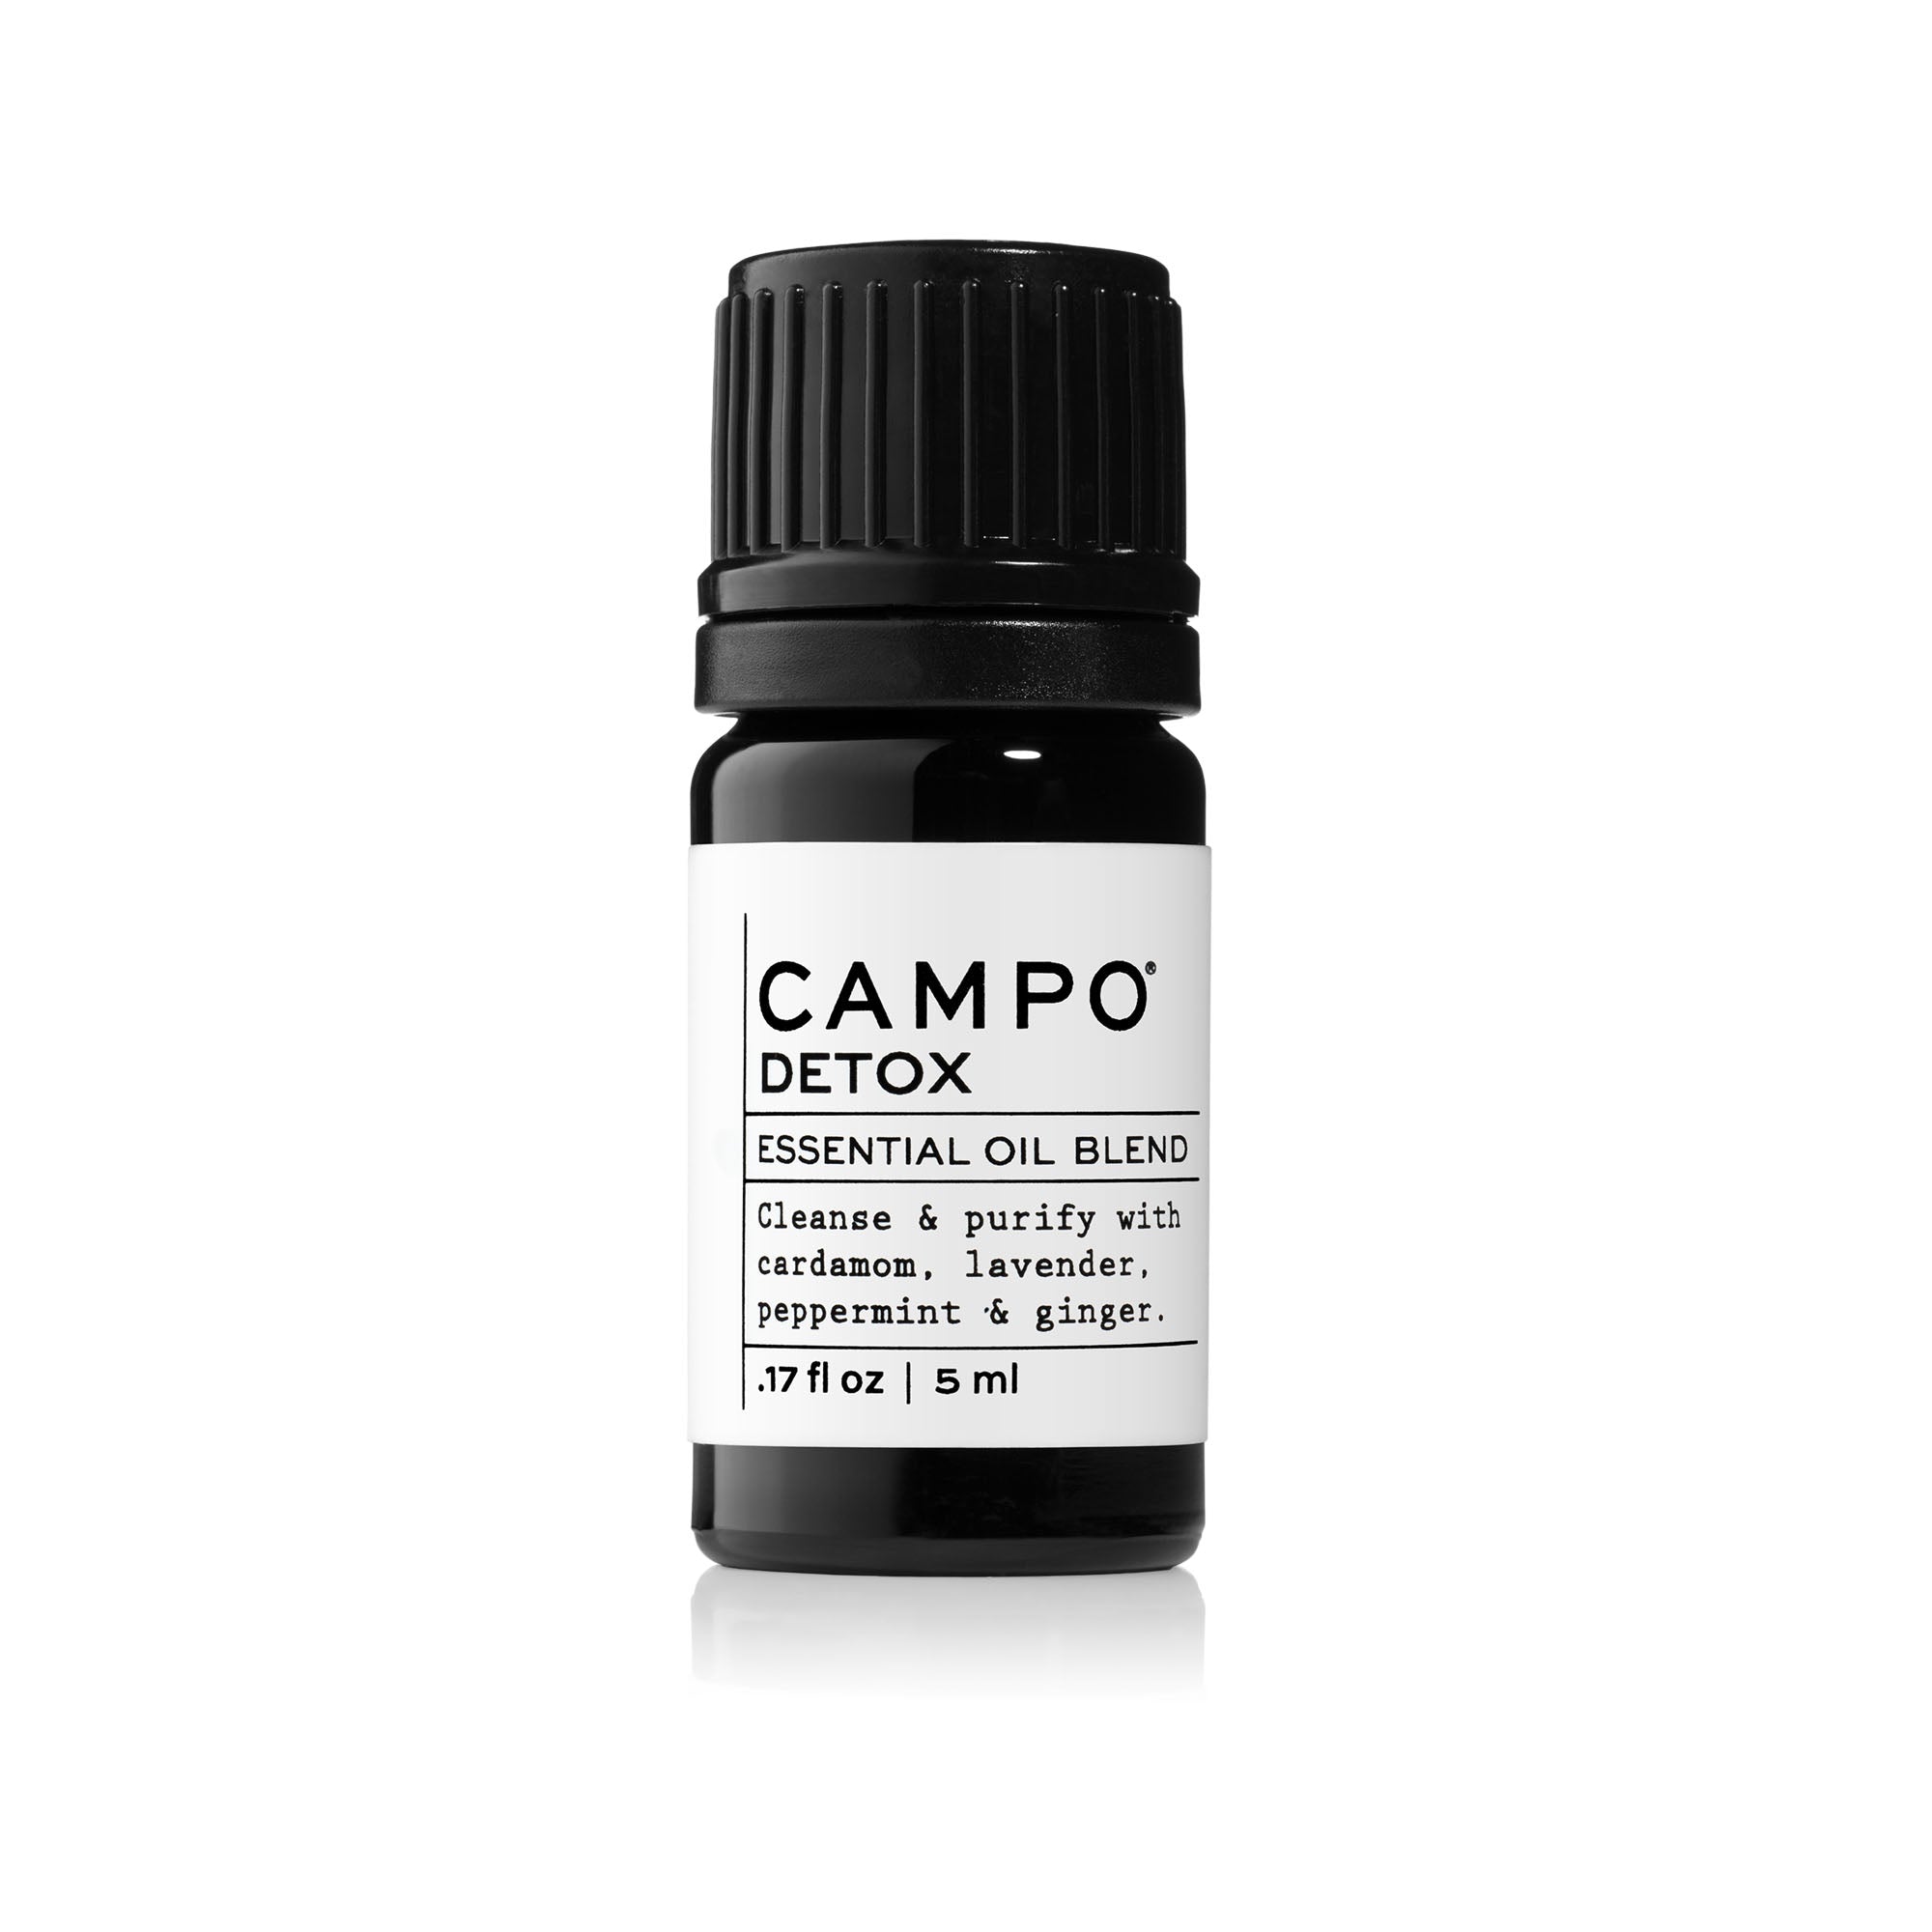 Campo Beauty DETOX Blend 15 ml Essential Oil. Help eliminate toxins naturally with this 100% natural essential oil blend of Cardamom, Lavender, Peppermint & Ginger.